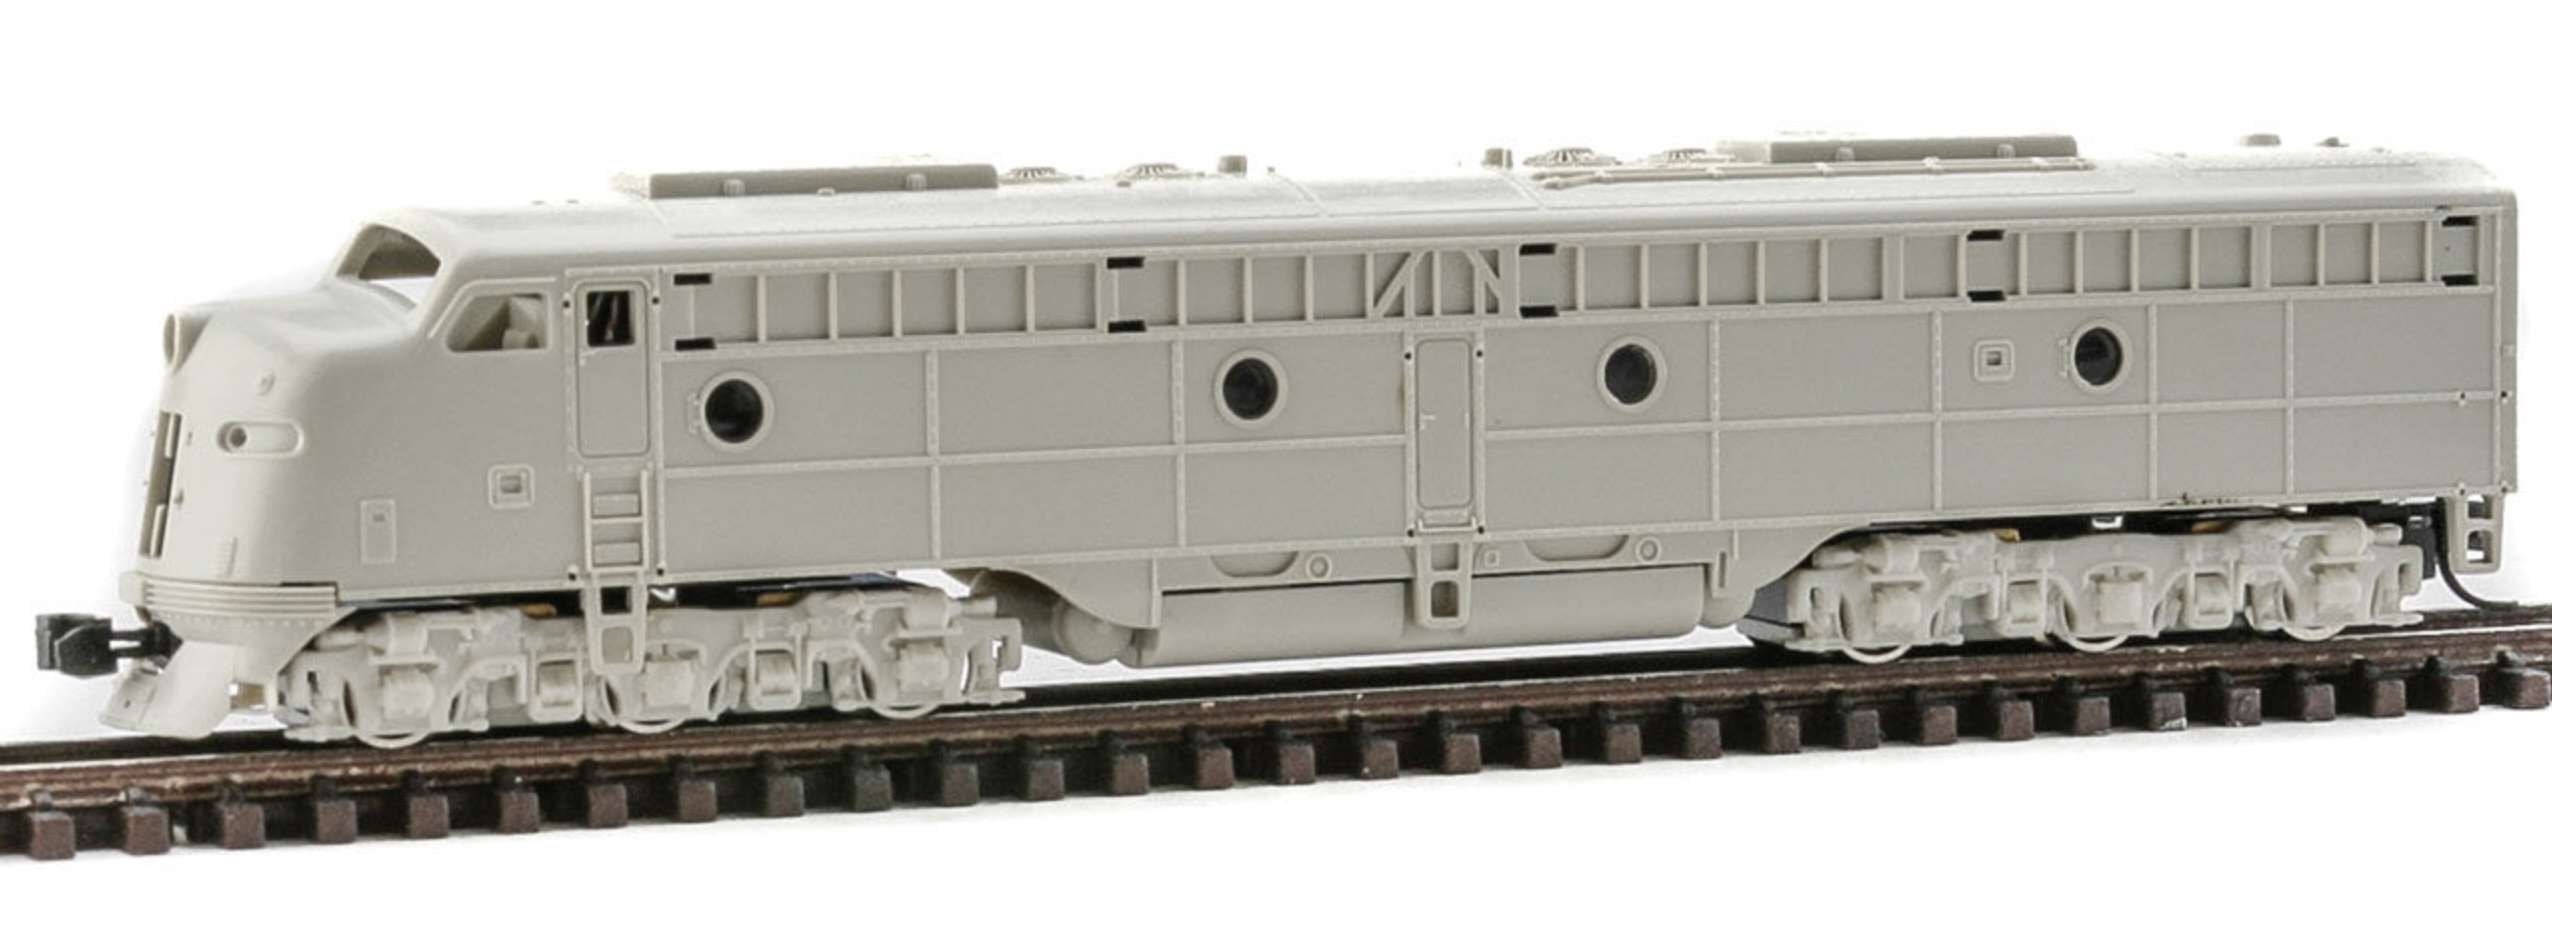 N Scale - Broadway Limited - 3069 - Locomotive, Diesel, EMD E8 - Undecorated